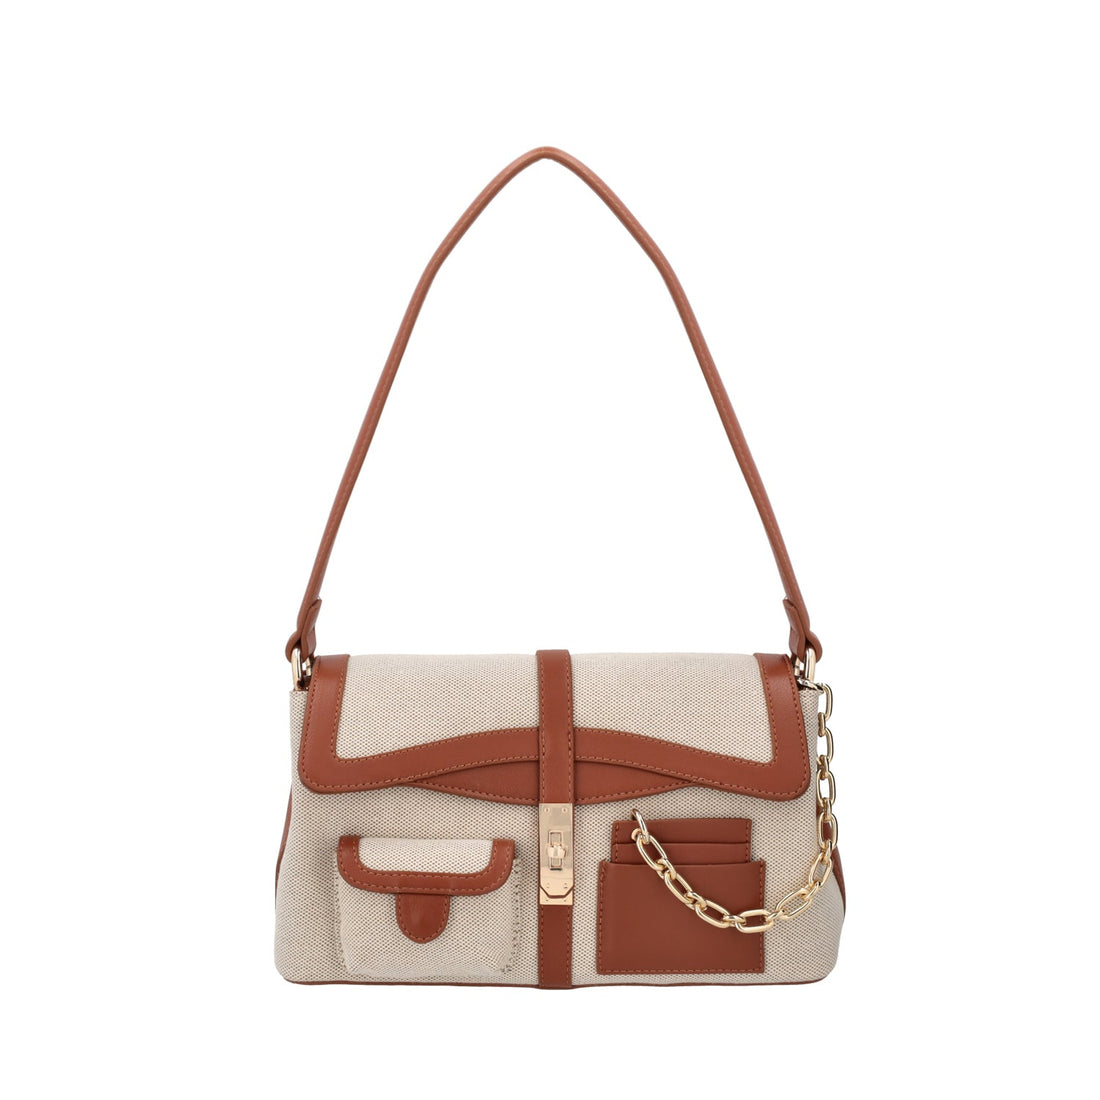 TAN FIORDALISO SHOULDER BAG WITH FLAP